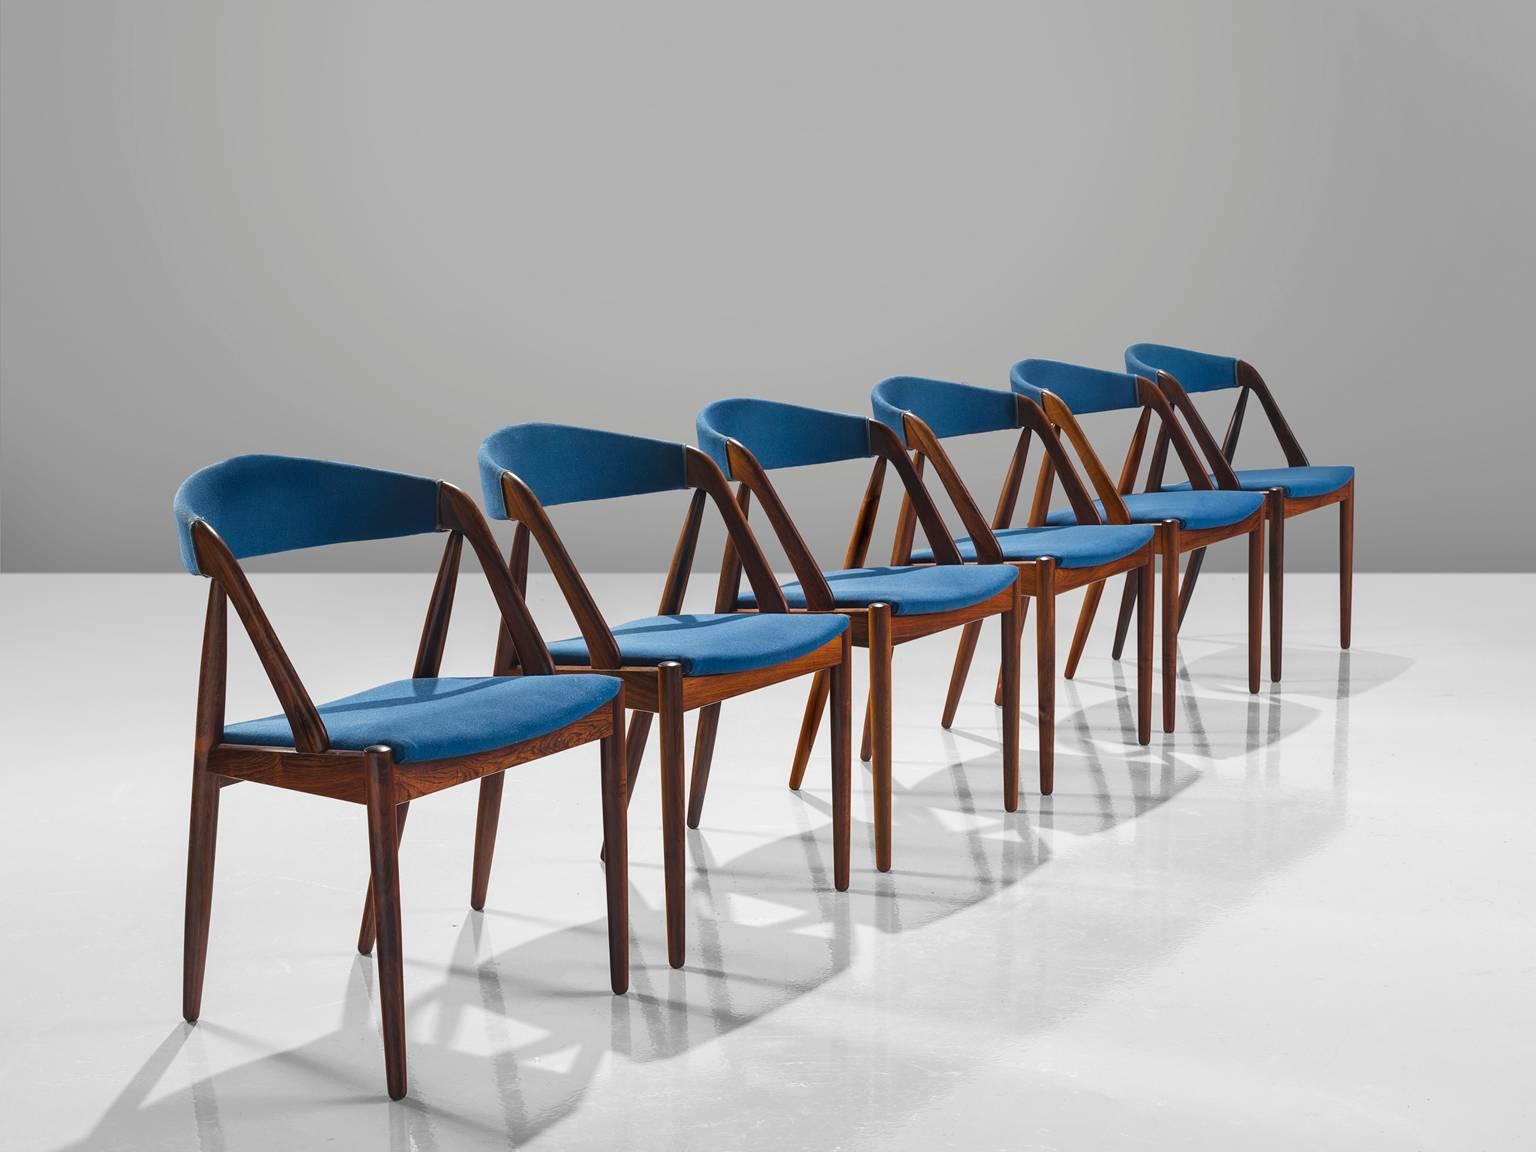 Kai Kristansen for Schou Andersen, six dining chairs model 31, in rosewood and blue fabric, Denmark, 1950s.

Set of six armchairs by Danish designer Kai Kristiansen. These sculptural chairs show beautiful lines and curves and are executed in